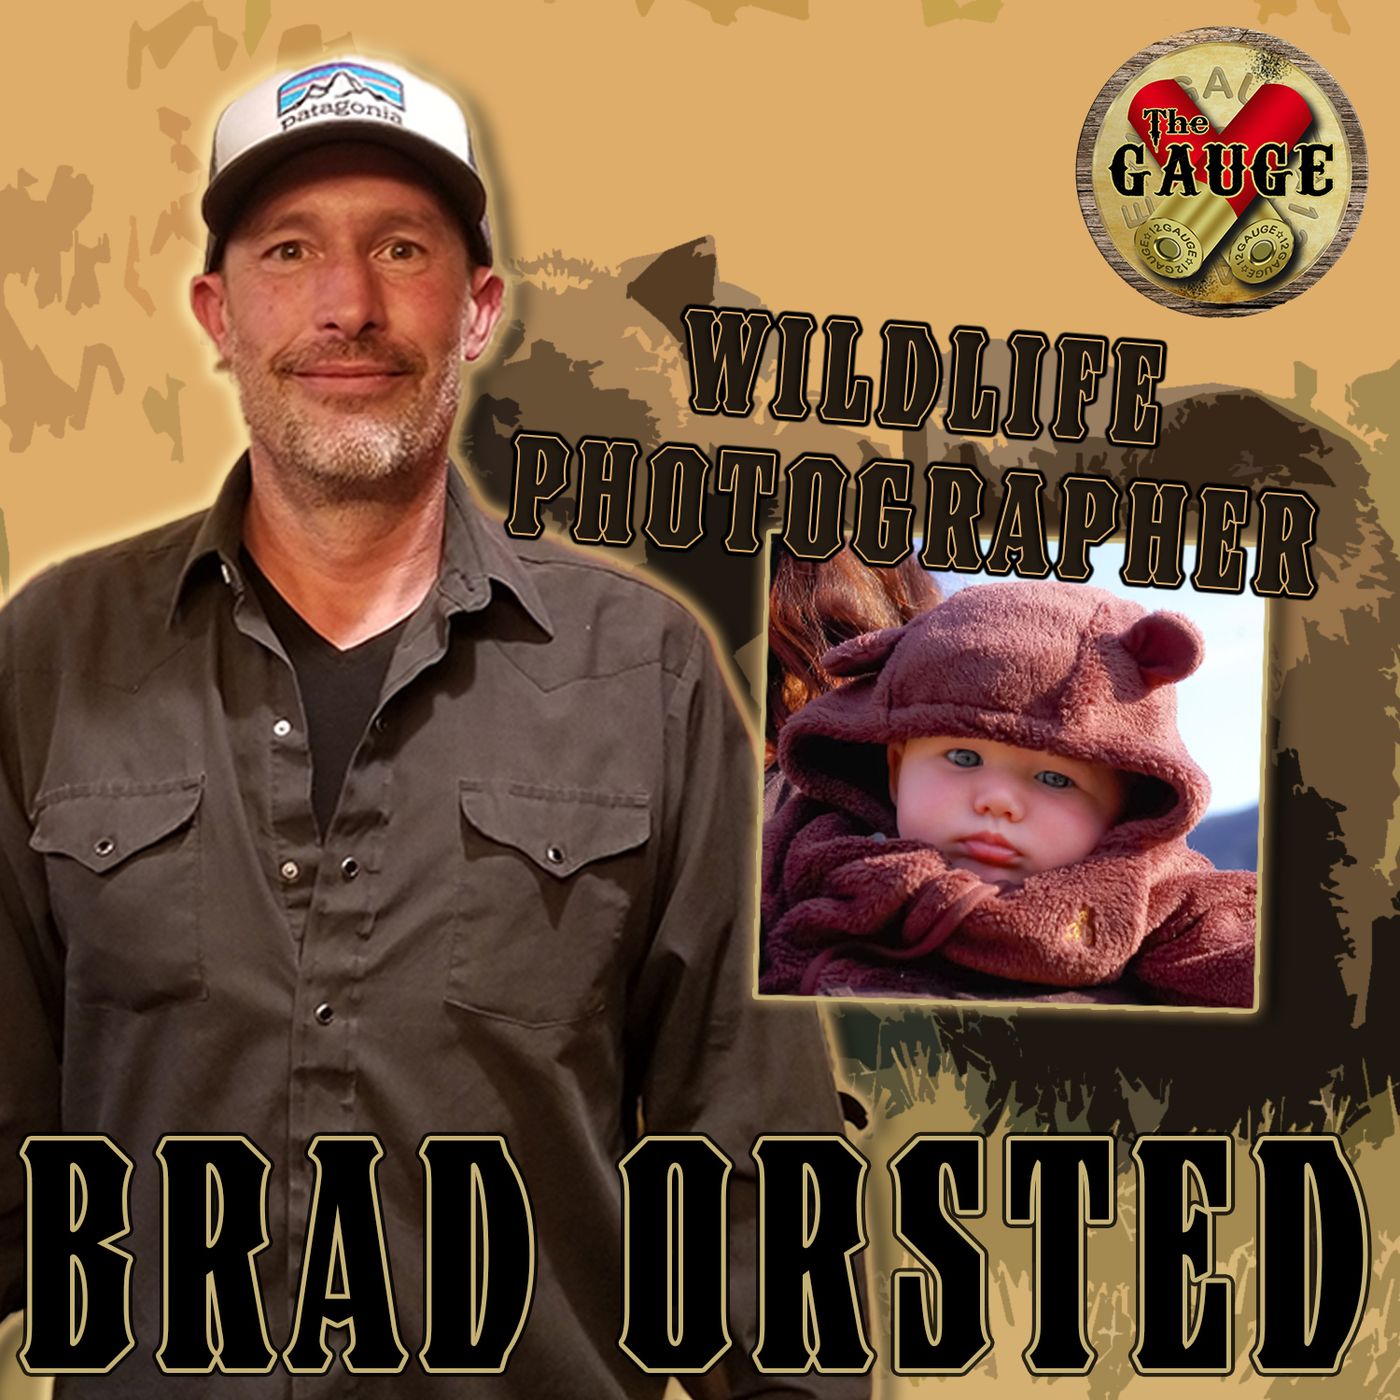 Brad Orsted